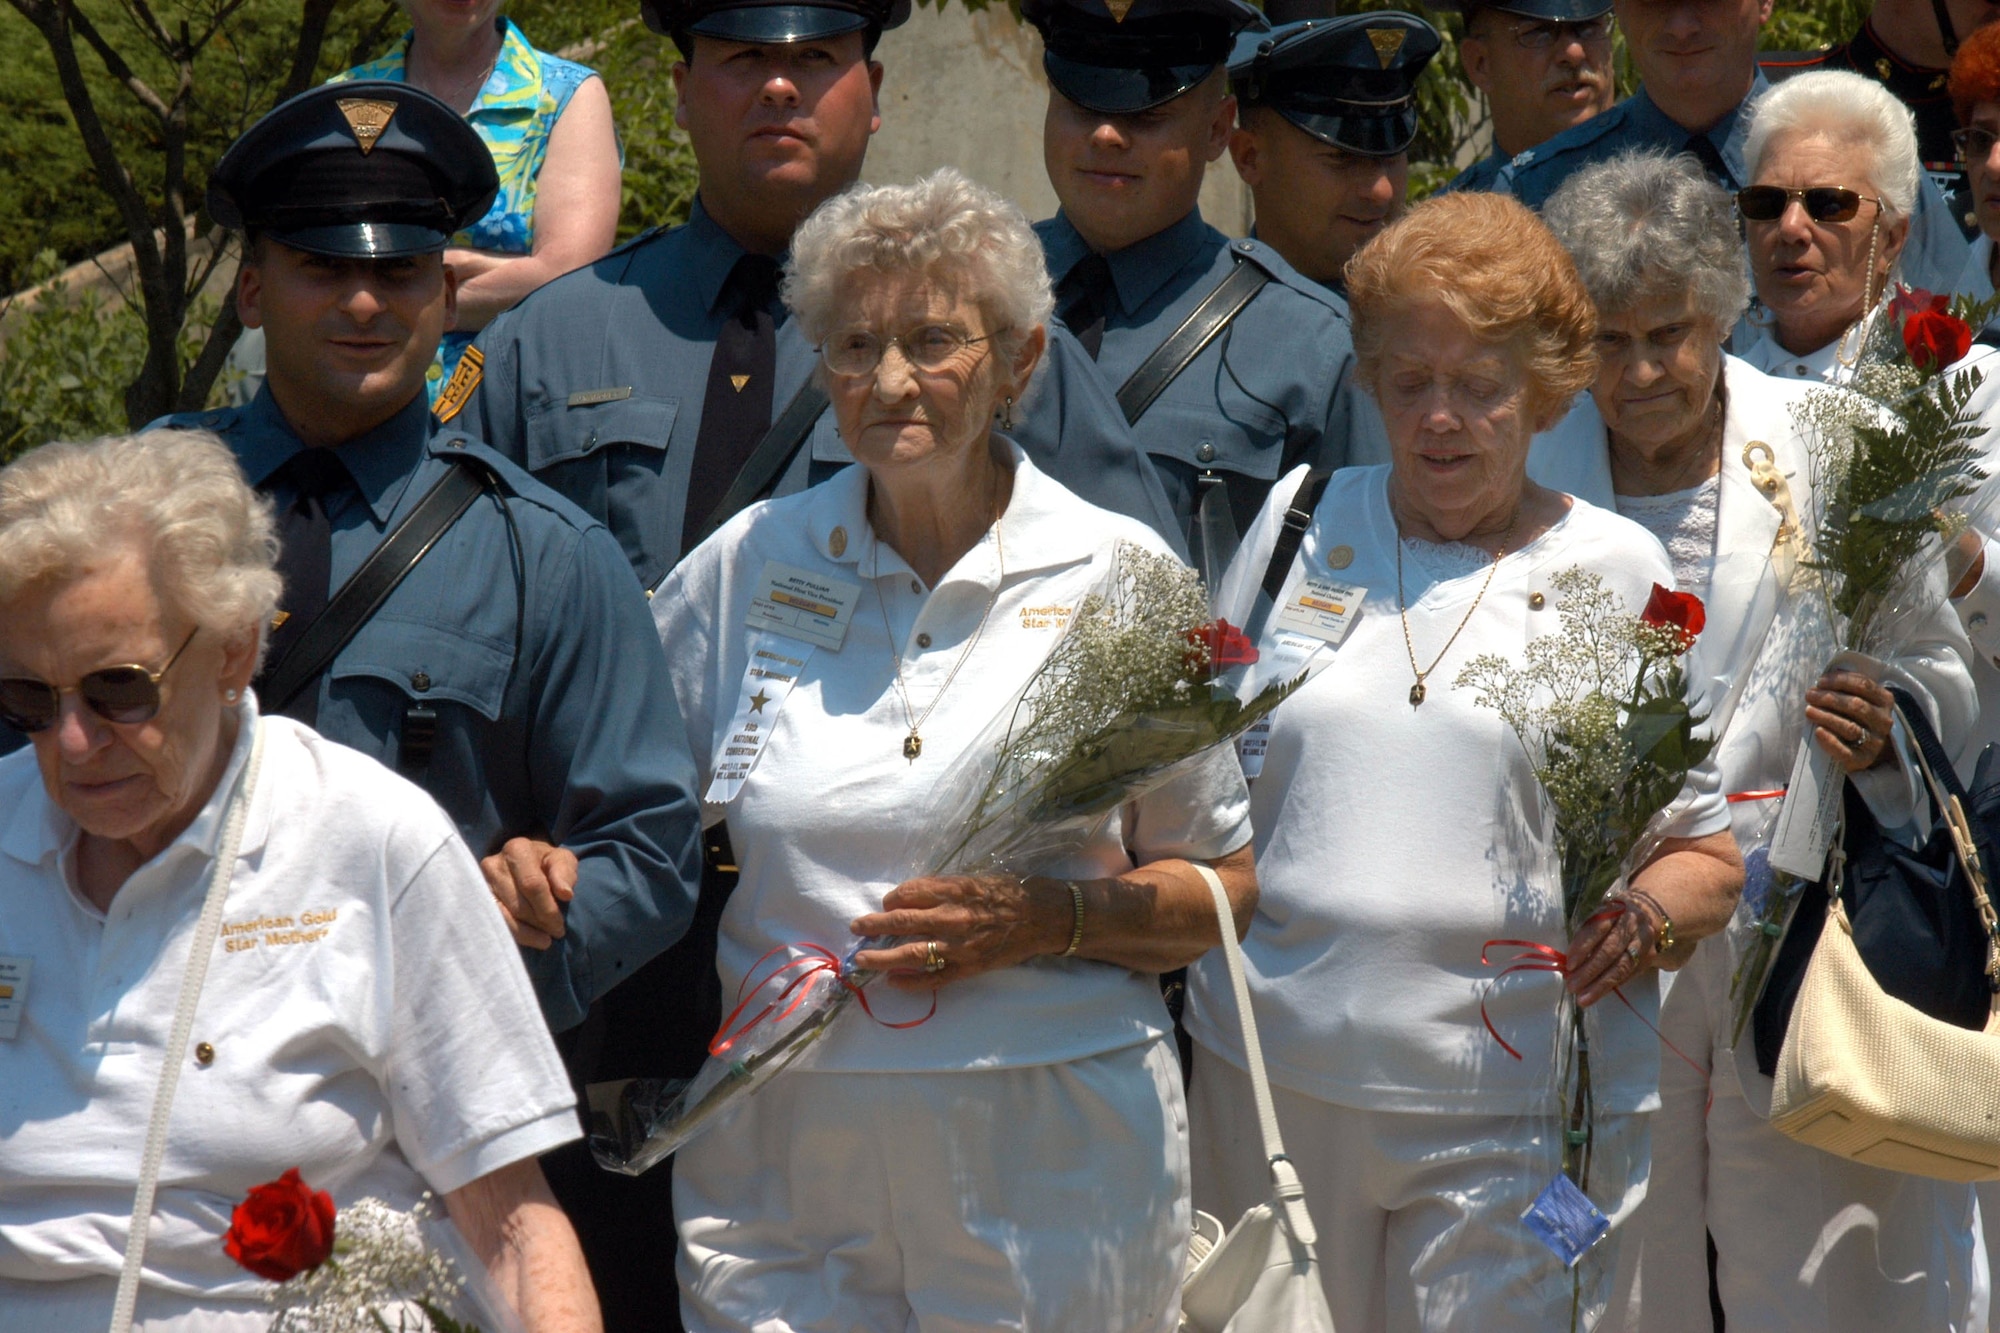 American Gold Star Mothers are escorted by New Jersey state troopers to the New Jersey Vietnam Memorial for a ceremony July 9 to honor them and the children they lost in America's conflicts. (DOD photo/Samantha L. Quigley)